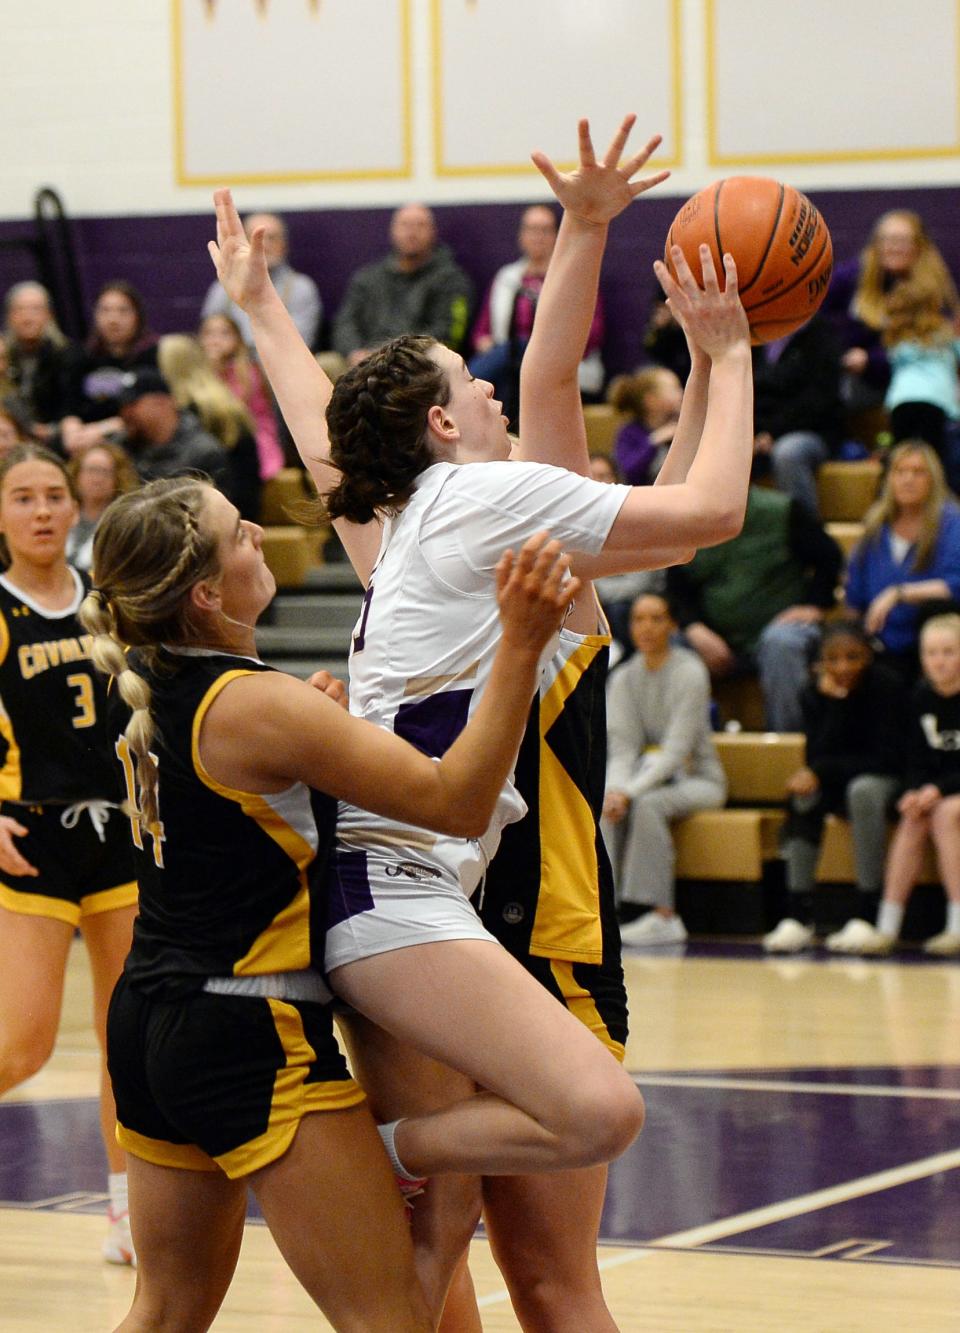 Smithsburg's Molly Weaver drives to the basket during the Leopards' 62-54 loss to South Carroll in the 1A West Region II semifinals.